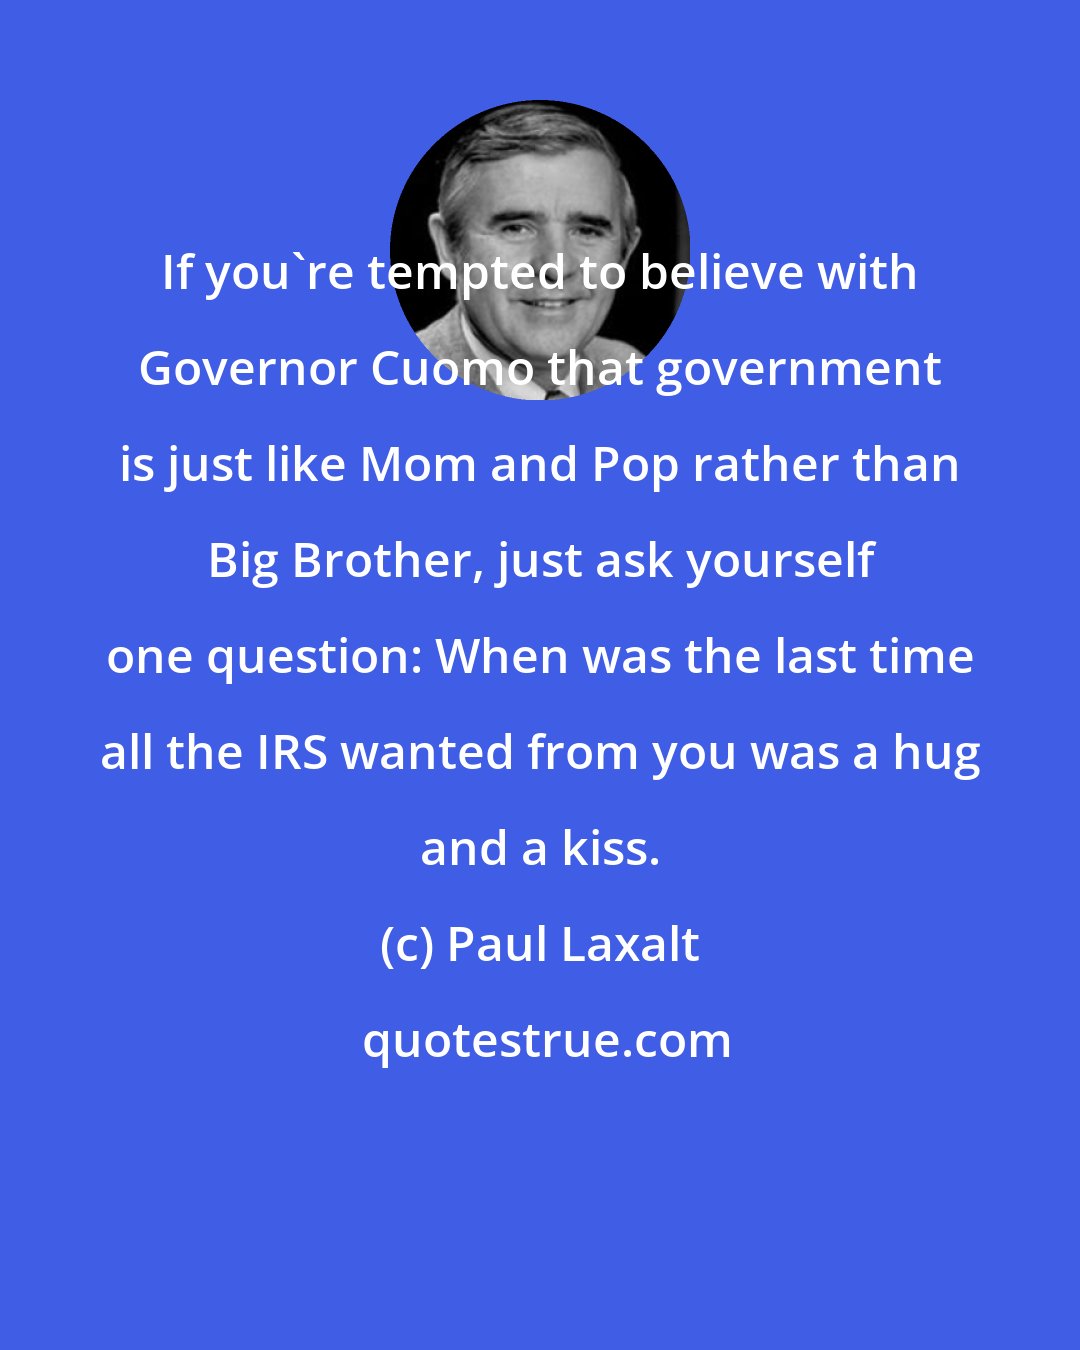 Paul Laxalt: If you're tempted to believe with Governor Cuomo that government is just like Mom and Pop rather than Big Brother, just ask yourself one question: When was the last time all the IRS wanted from you was a hug and a kiss.